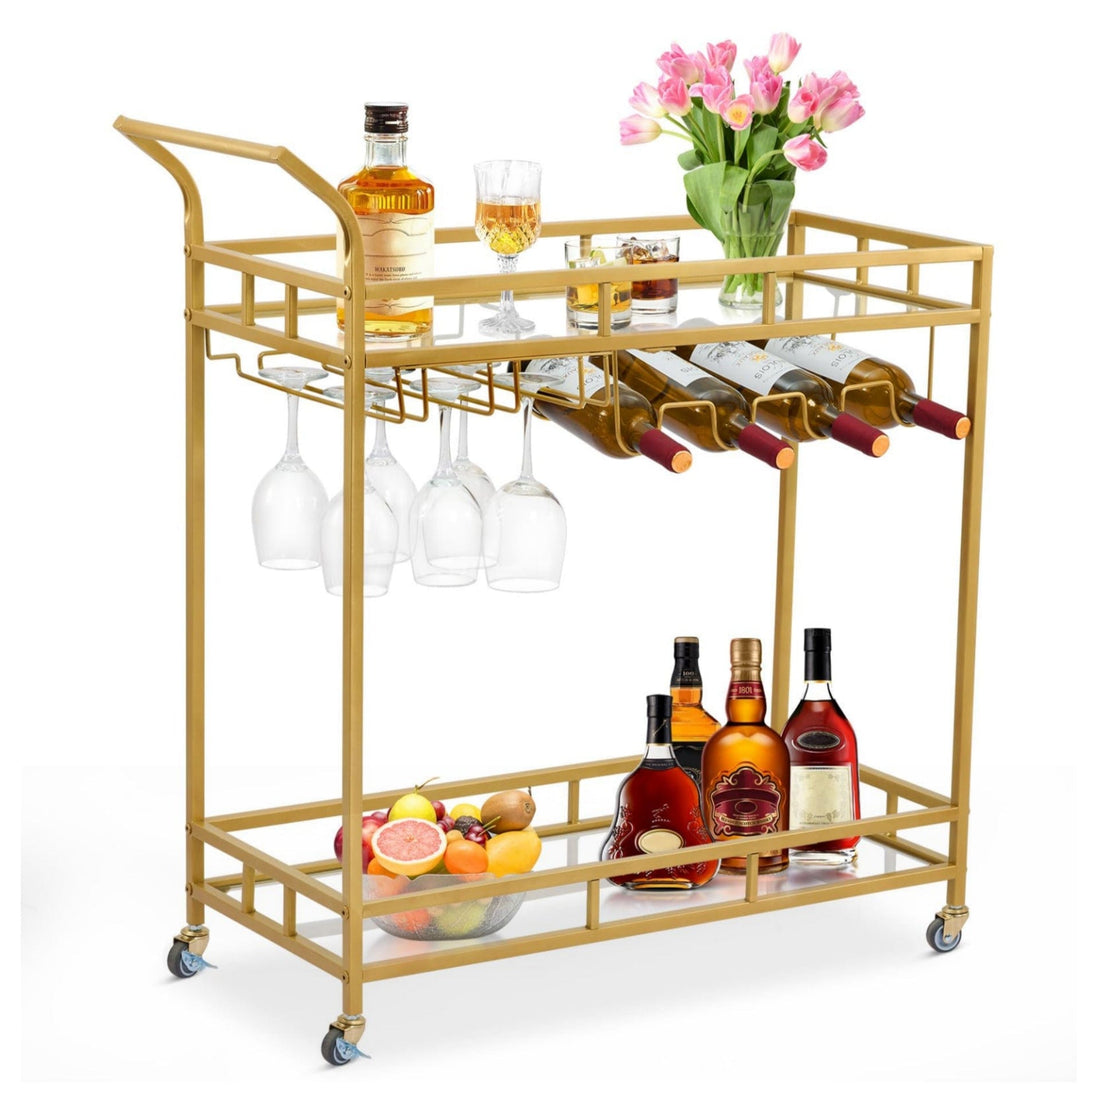 Large Bar Cart Home Bar Serving Cart Wine Cart with 2 Mirrored Shelves Wine Holders Gold